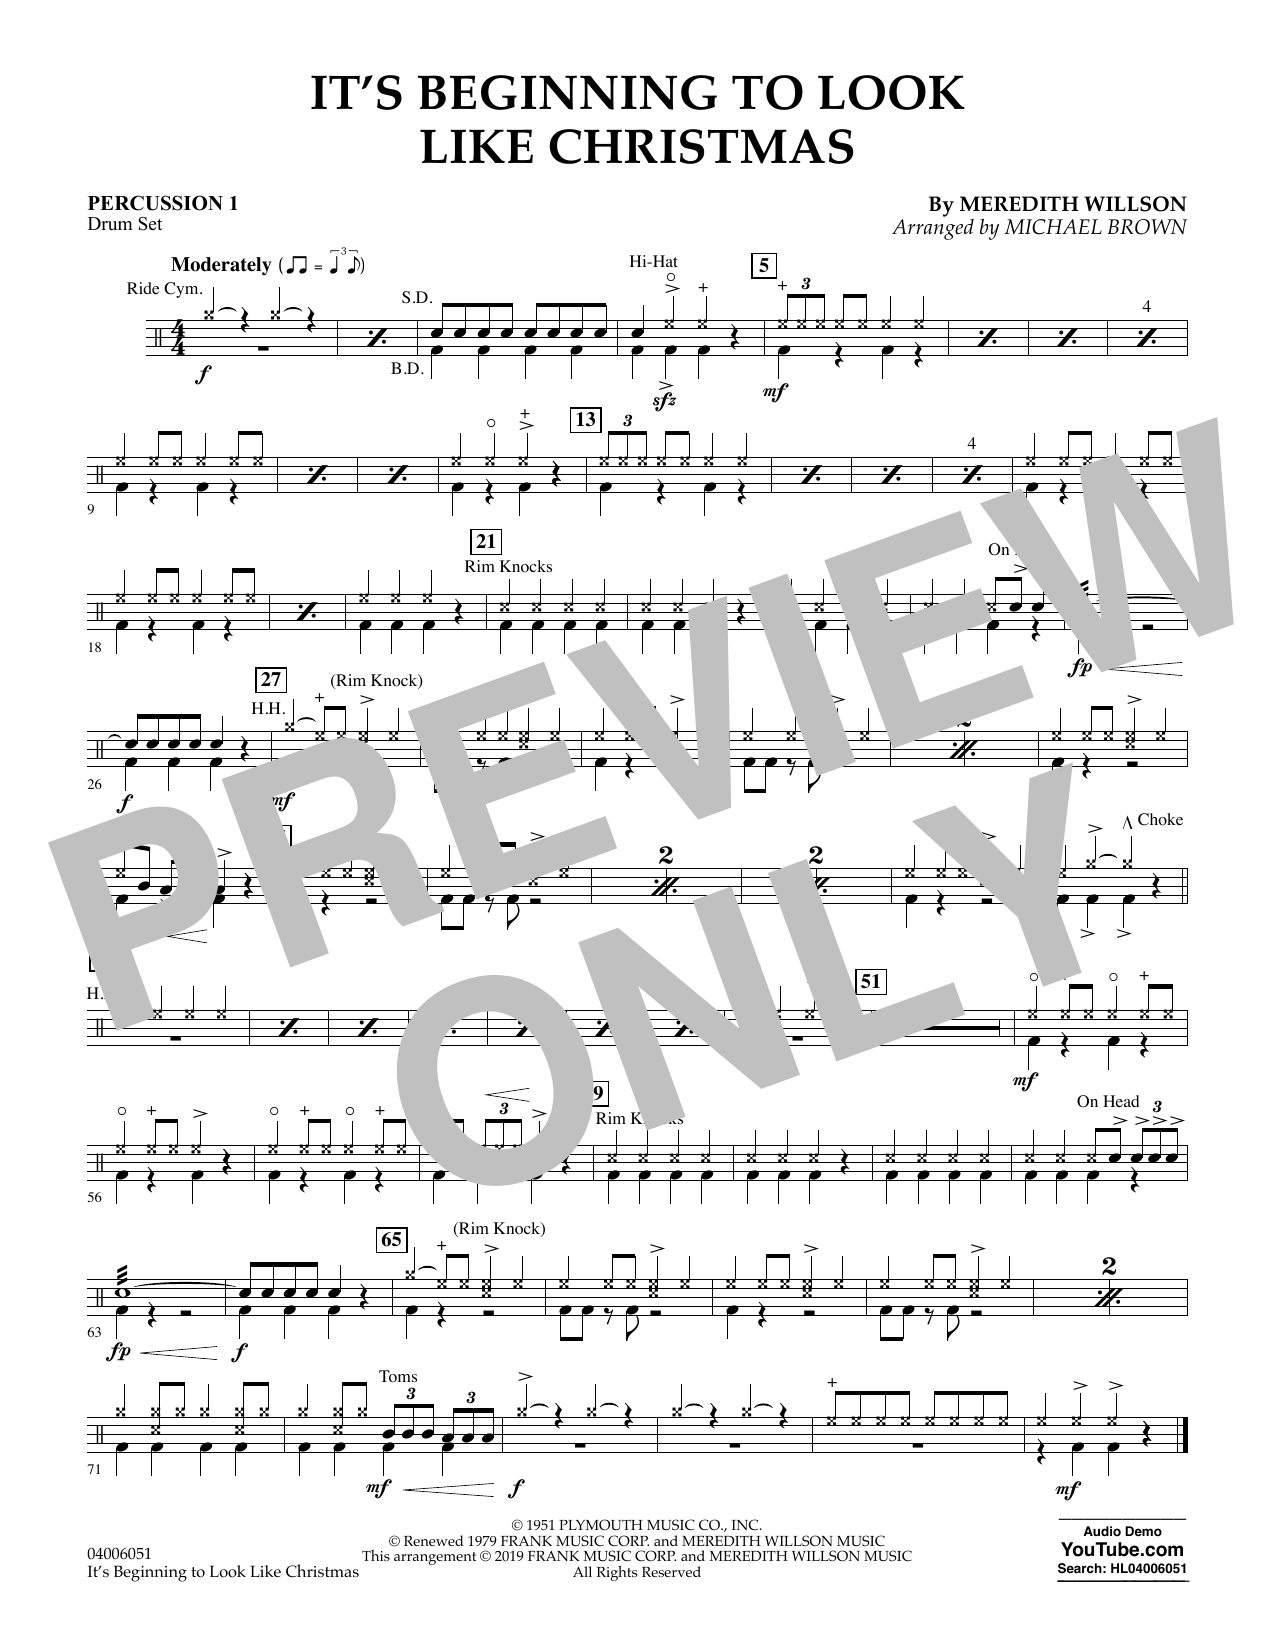 Meredith Willson It's Beginning to Look Like Christmas (arr. Michael Brown) - Percussion 1 sheet music preview music notes and score for Concert Band including 1 page(s)